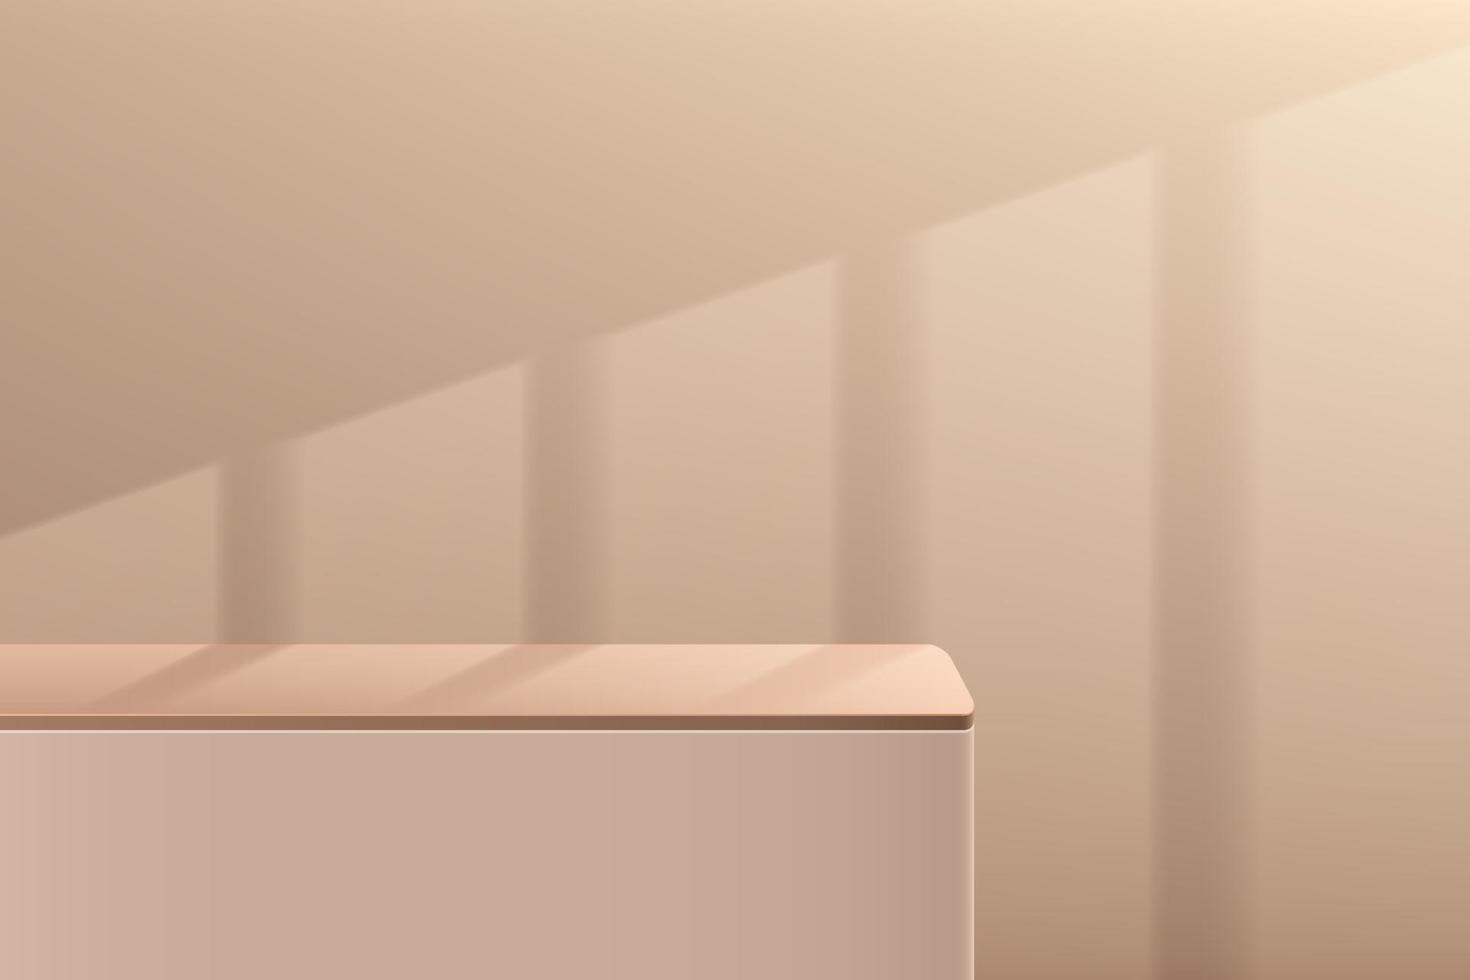 Abstract brown and beige 3D round corner cube pedestal or stand podium with window lighting. Minimal wall scene for cosmetic product display presentation. Vector geometric rendering platform design.